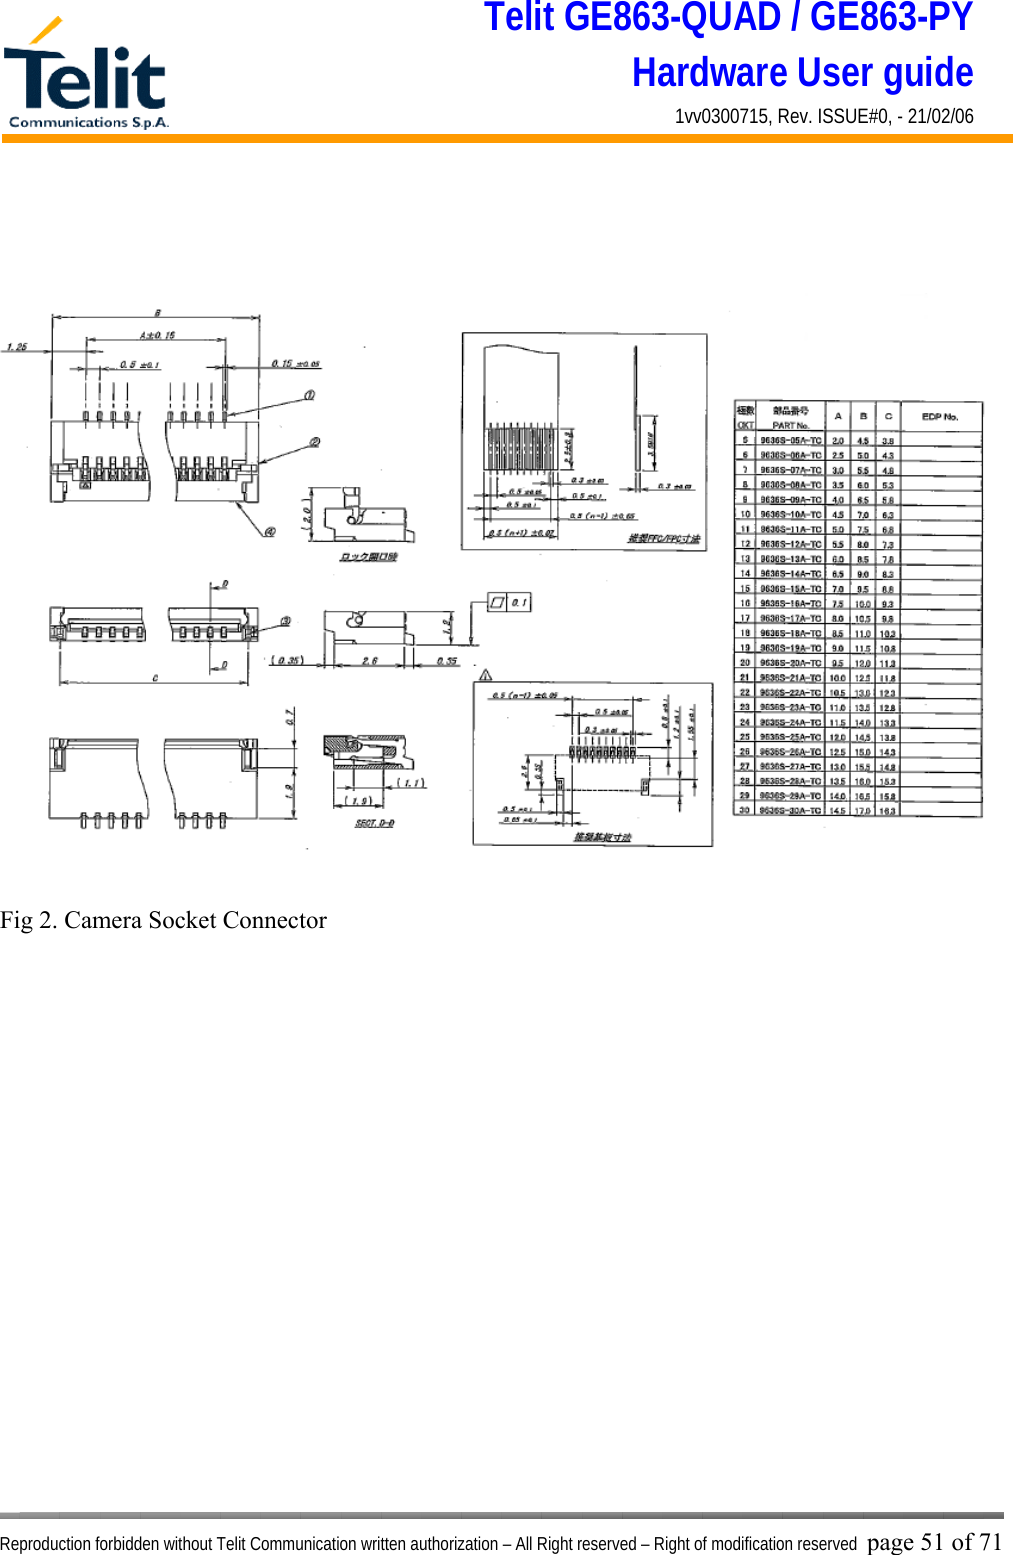 Telit GE863-QUAD / GE863-PY Hardware User guide 1vv0300715, Rev. ISSUE#0, - 21/02/06    Reproduction forbidden without Telit Communication written authorization – All Right reserved – Right of modification reserved page 51 of 71                    Fig 2. Camera Socket Connector 